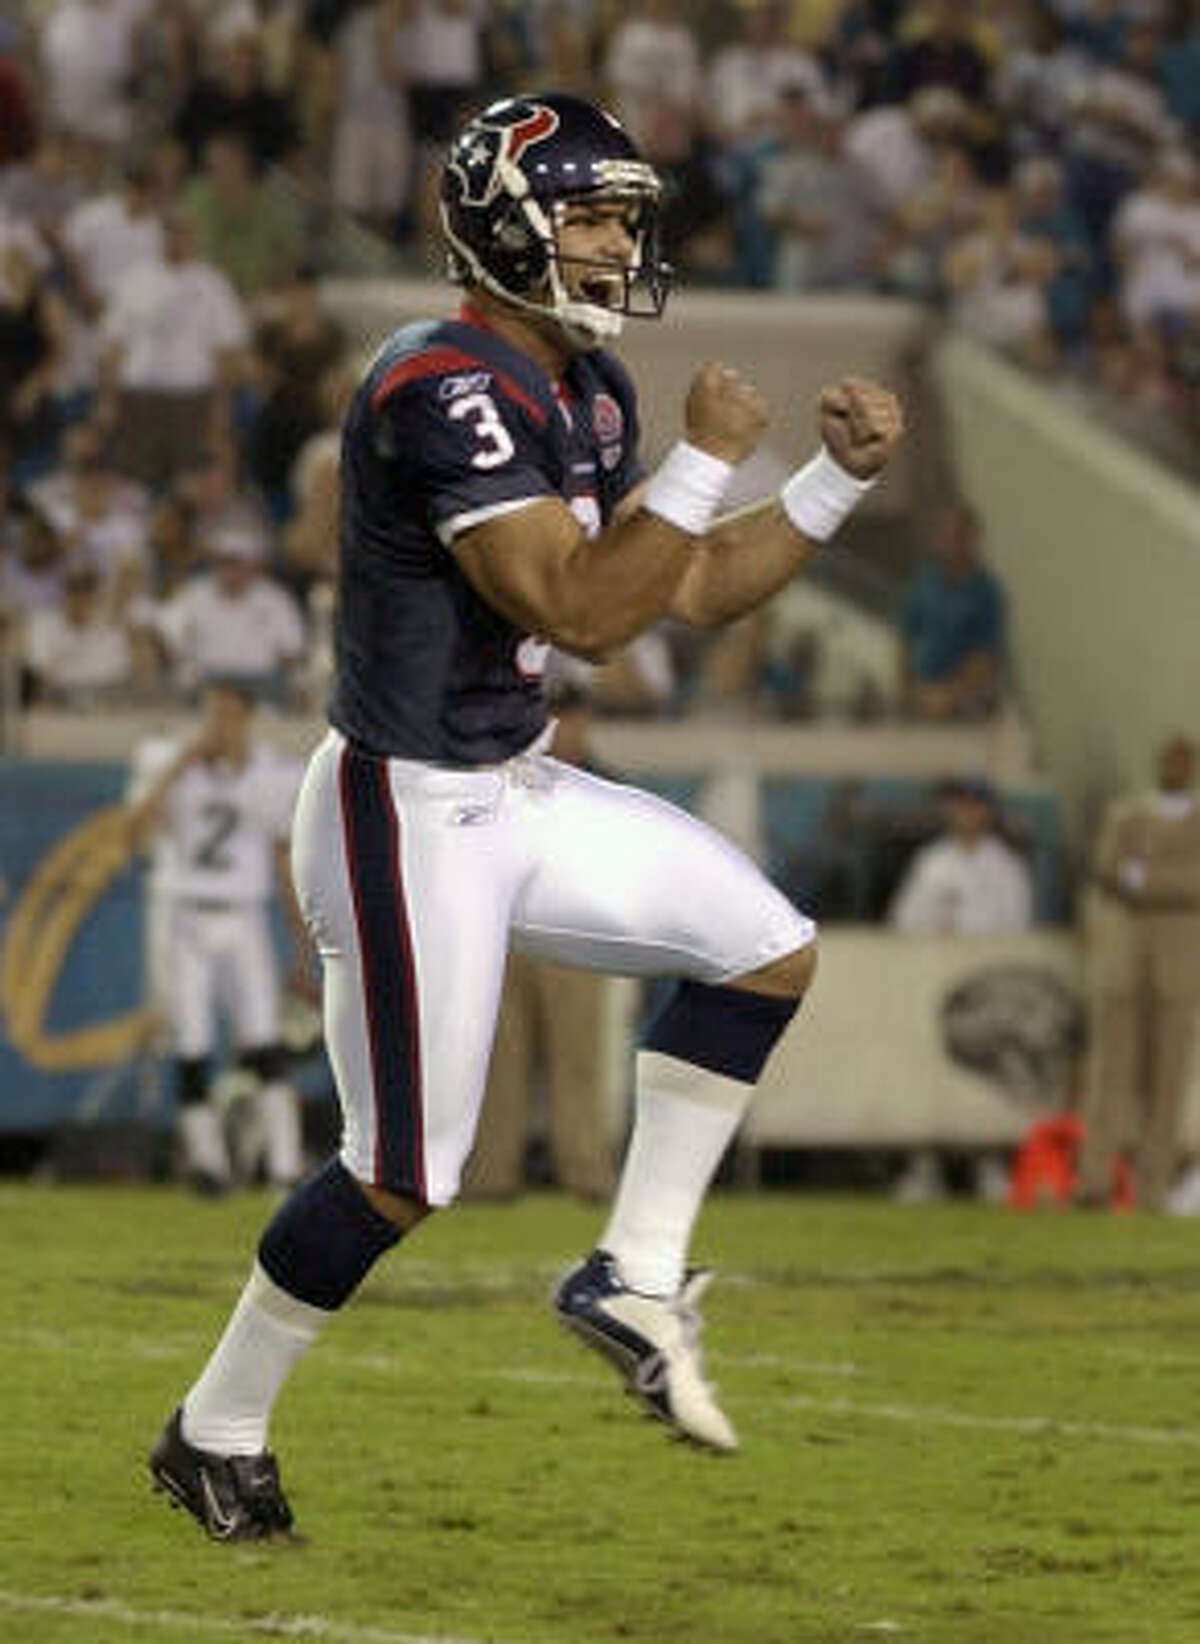 Oct. 27, 2002: Texans 21, Jaguars 19 A 45-yard field goal by Kris Brown late in the fourth quarter provided the winning margin for the franchise’s first road victory. It was particularly sweet for the cadre of ex-Jaguars such as Seth Payne, Gary Walker and Tony Boselli and coach Dom Capers, a former Jacksonville defensive coordinator.